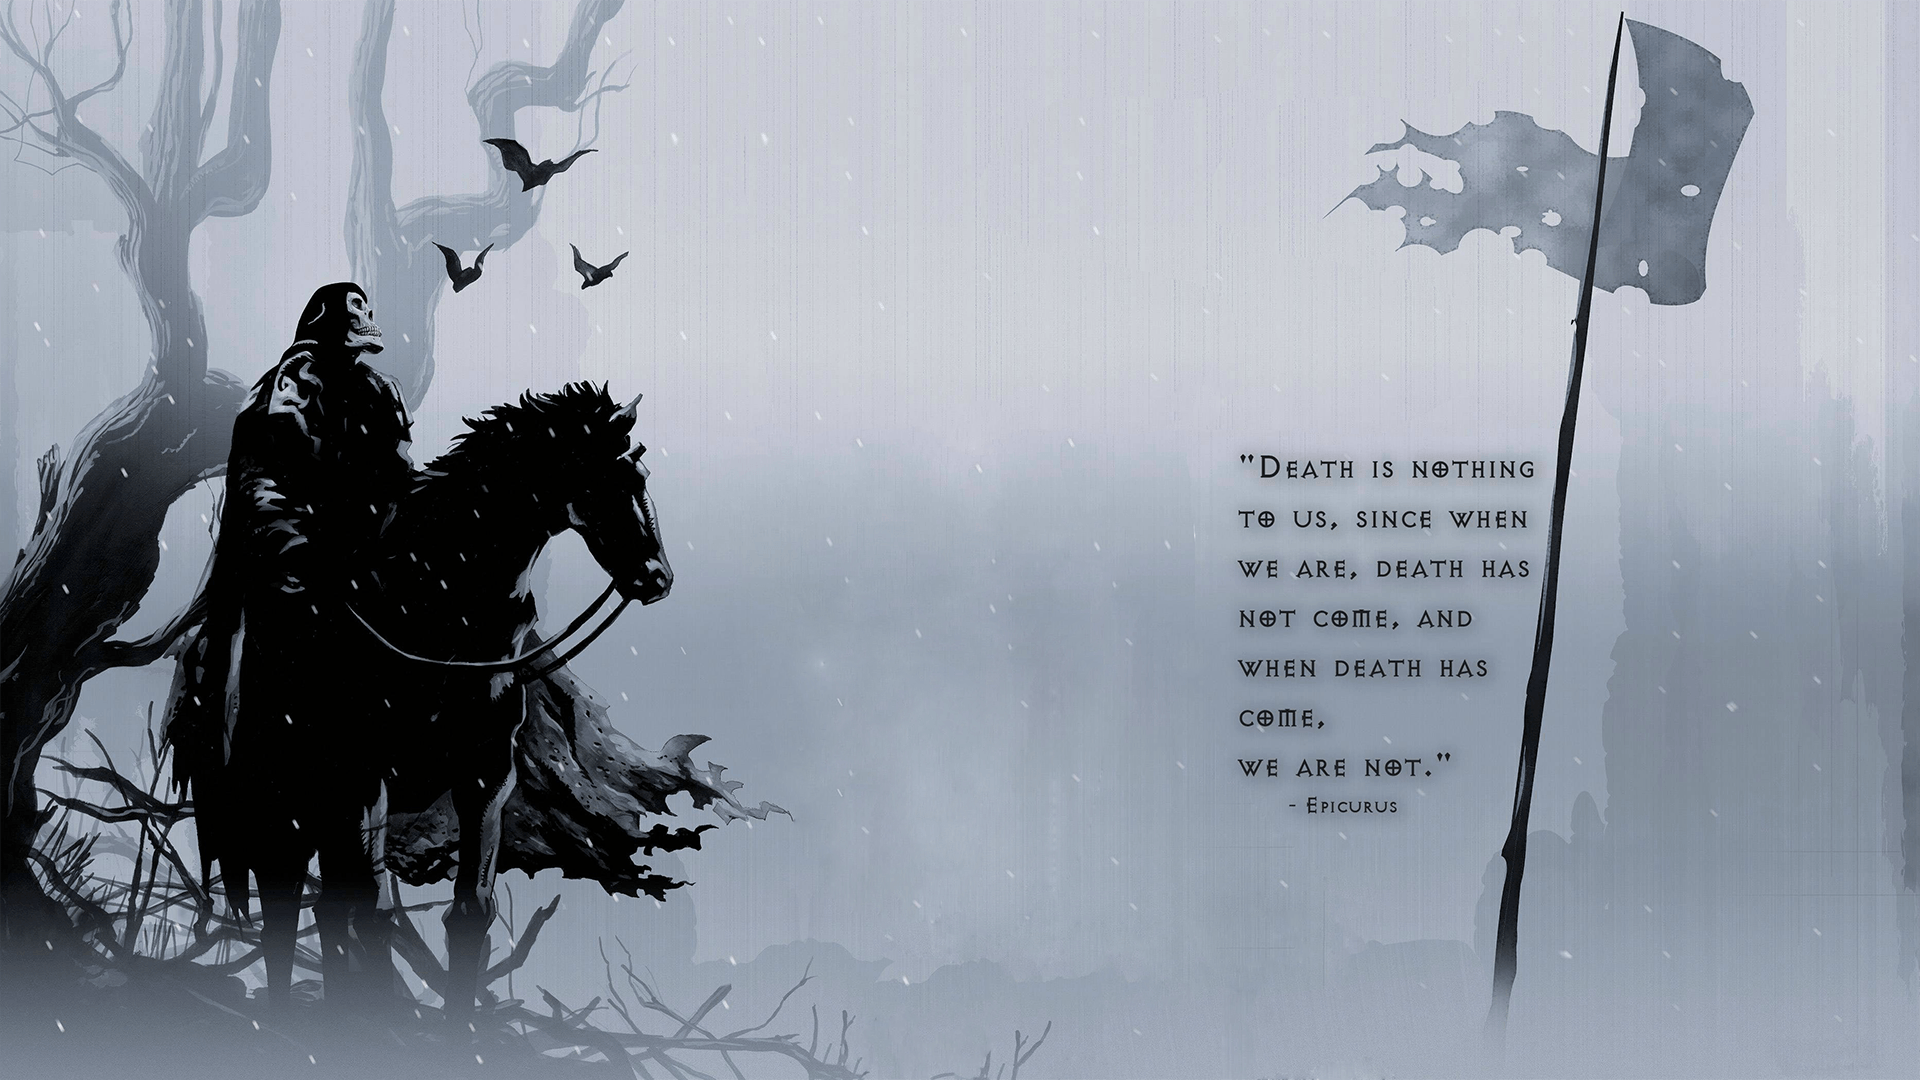 Death is nothing to us. Now in wallpaper form. 1920x1080